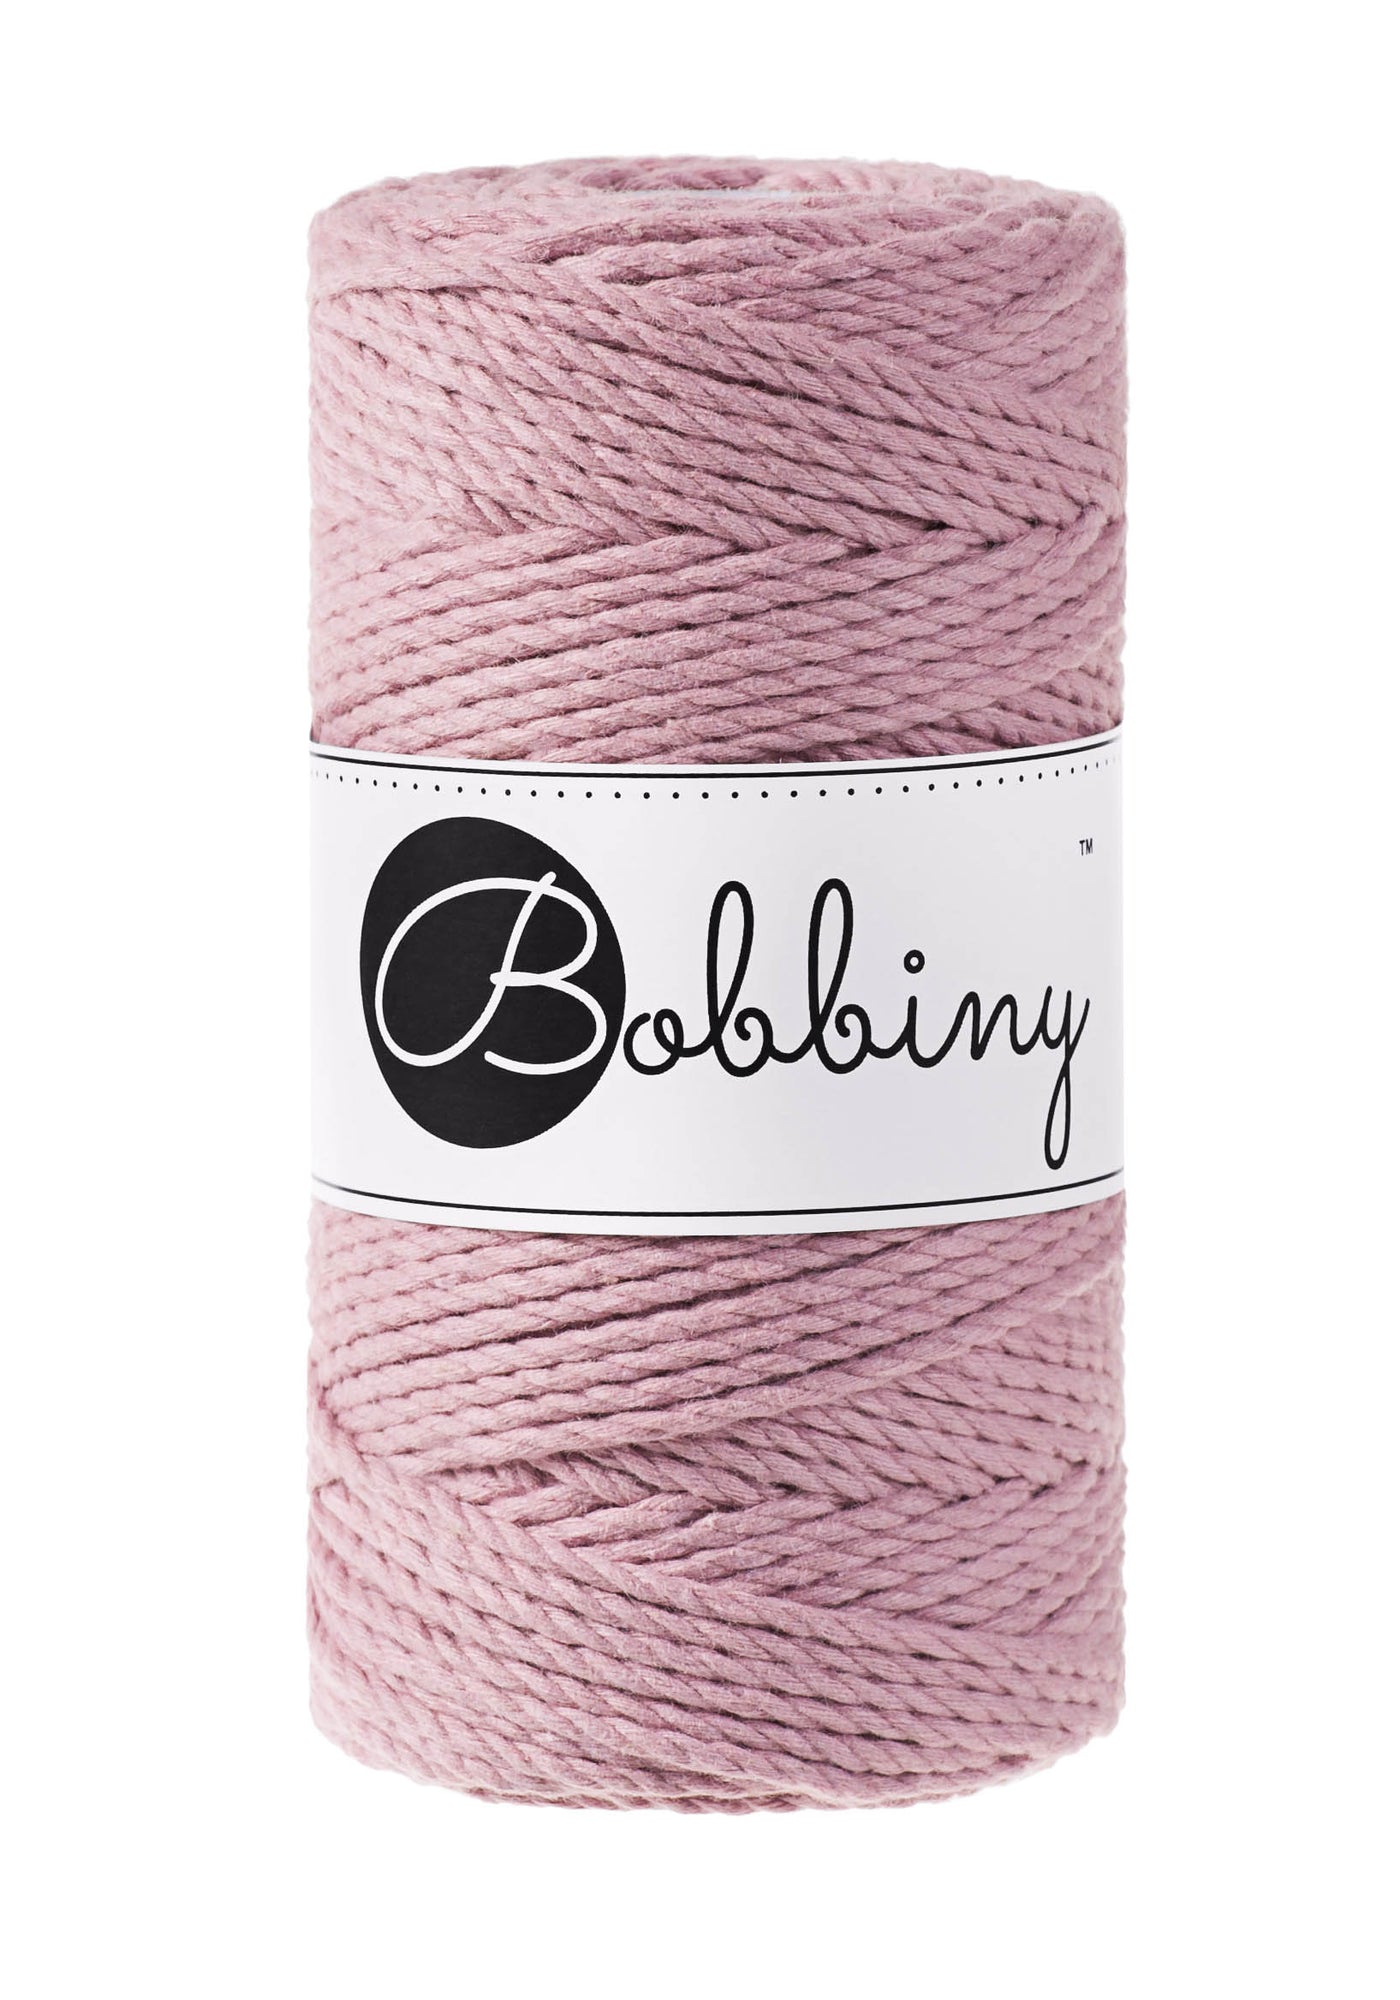 This superb new product from Bobbiny is the latest addition to their gorgeous range of products.  Made from 100% recycled cotton, it is perfect for Macrame projects due to its sturdiness. It contains no harmful dyes or chemicals and is OEKO-TEK certified.  This super soft triple twist rope also makes the most spectacular fringes and tassels.  Length: 100m (108 Yards)  Weight: 400gms  Contains 60 Fibres ( 3x20 )  Also available in 5mm